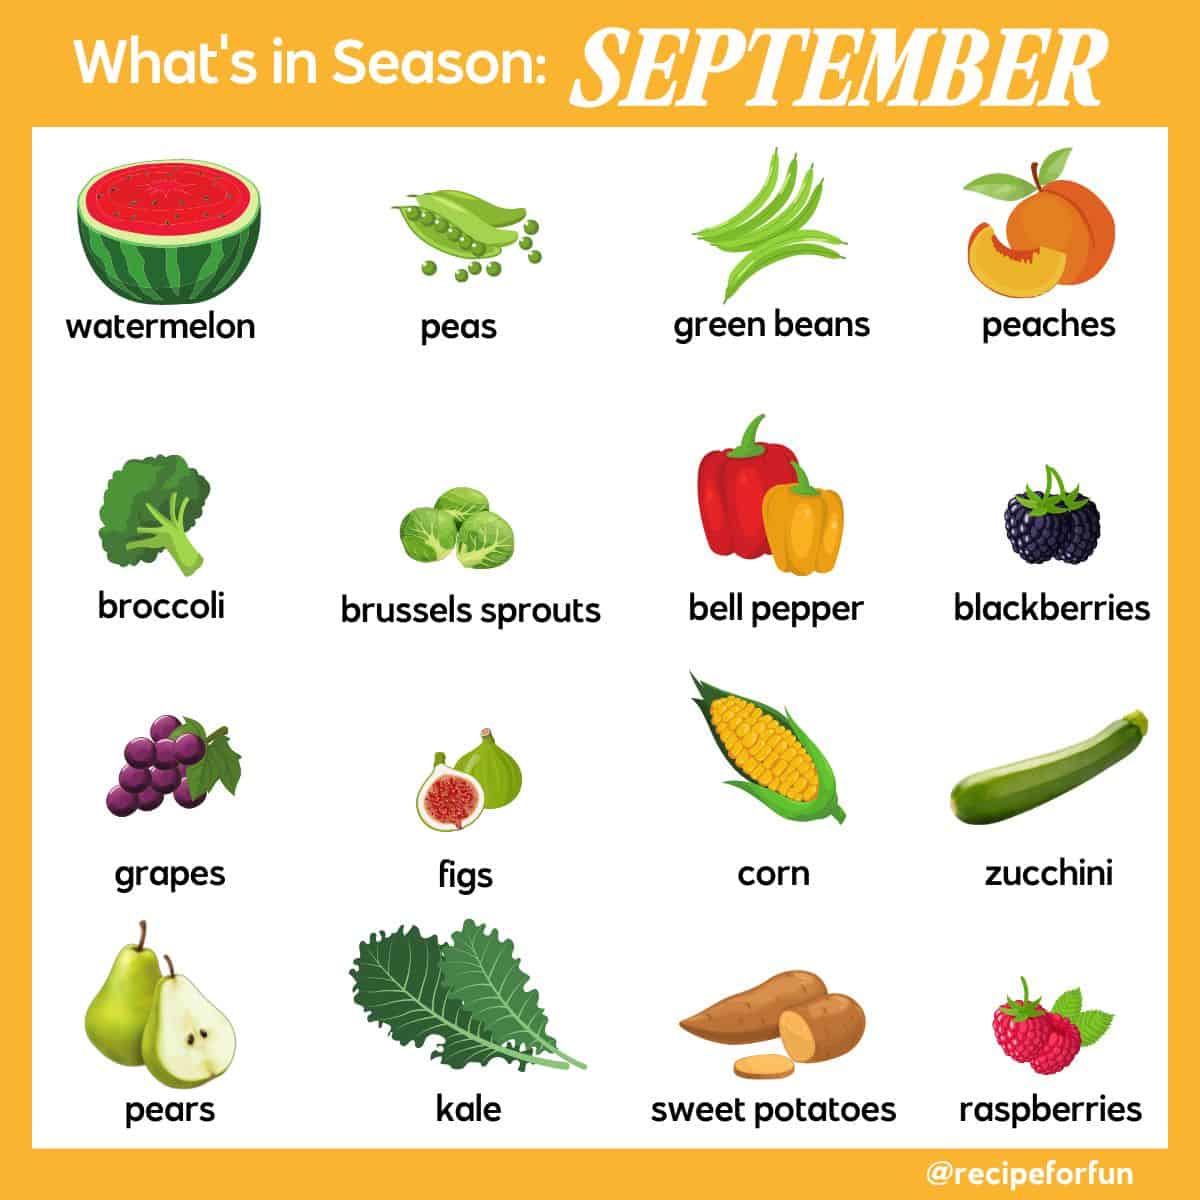 An illustrated infographic of what produce is in season in August.